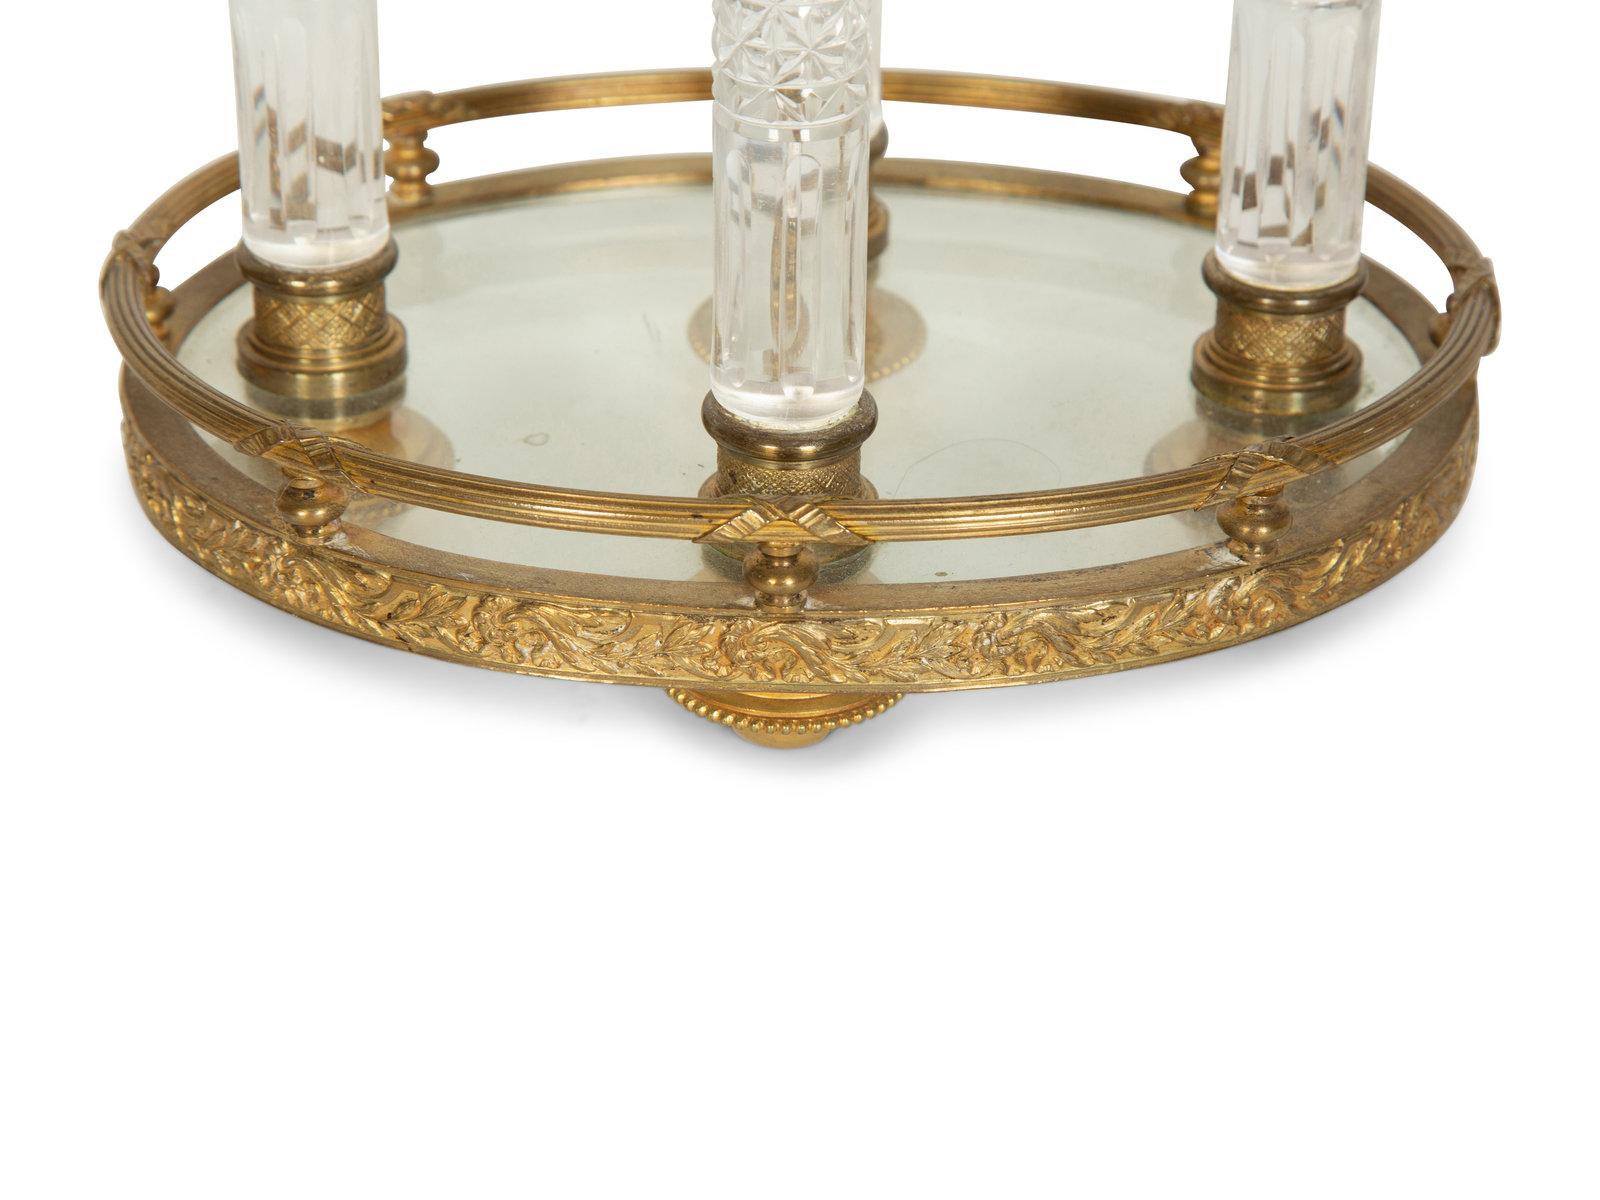 A very fine gilt bronze centerpiece featuring hand cut crystal columns (4). Base and Top supporting oval container. France, circa 1900. 
Dimensions: Height 10 1/2